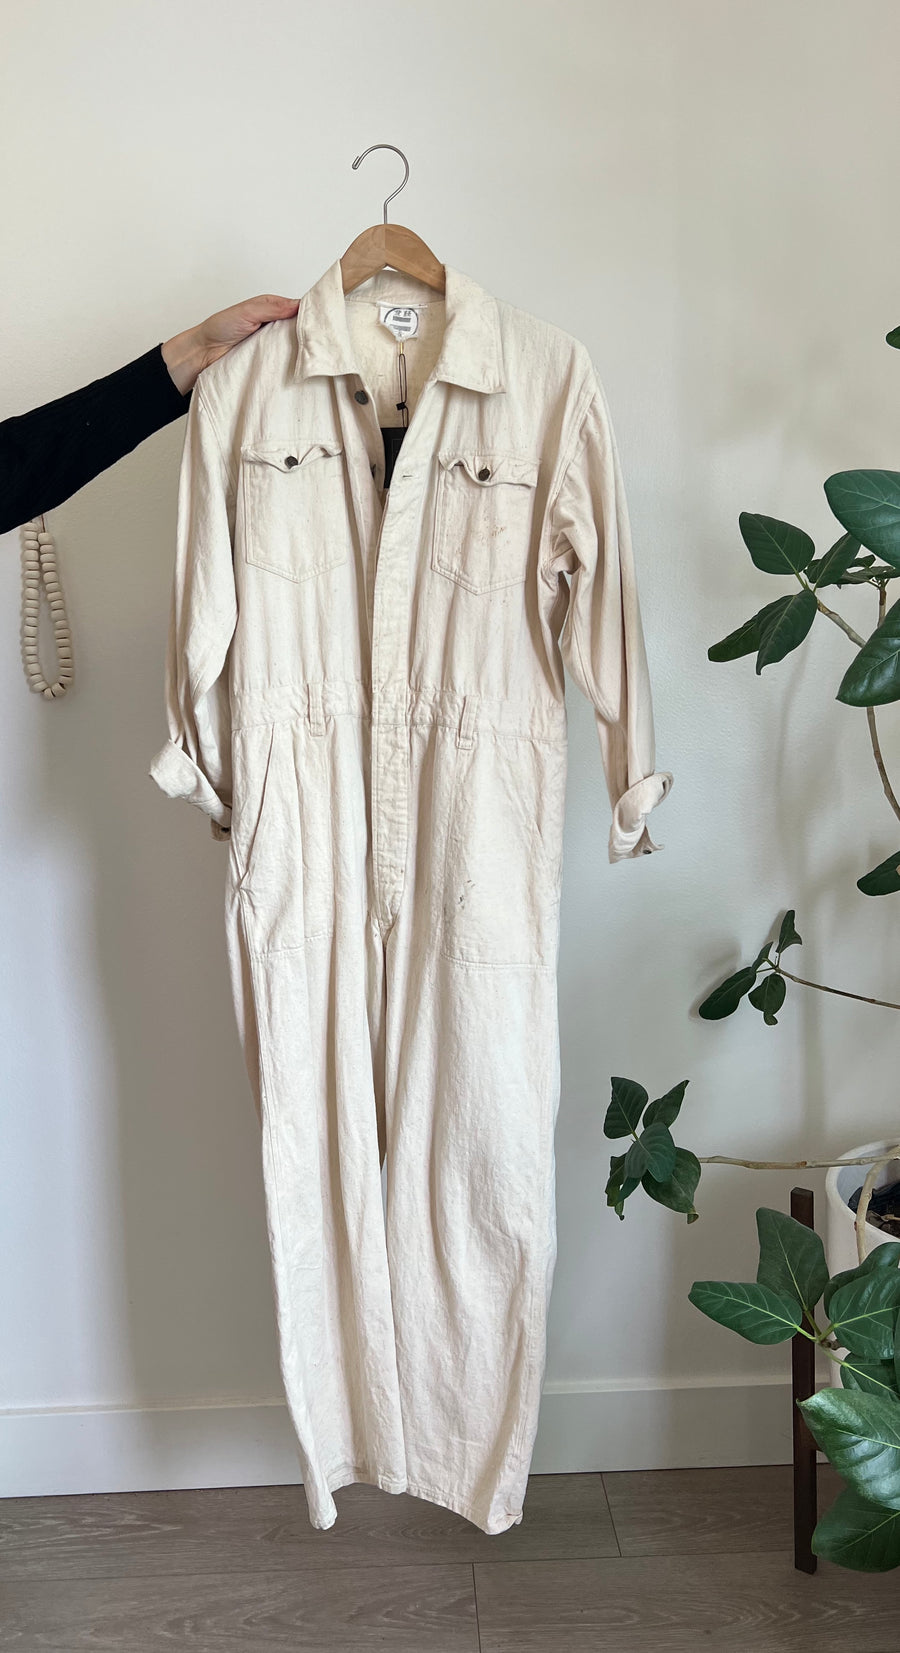 In The Den Vintage Japanese Coveralls with White Cat